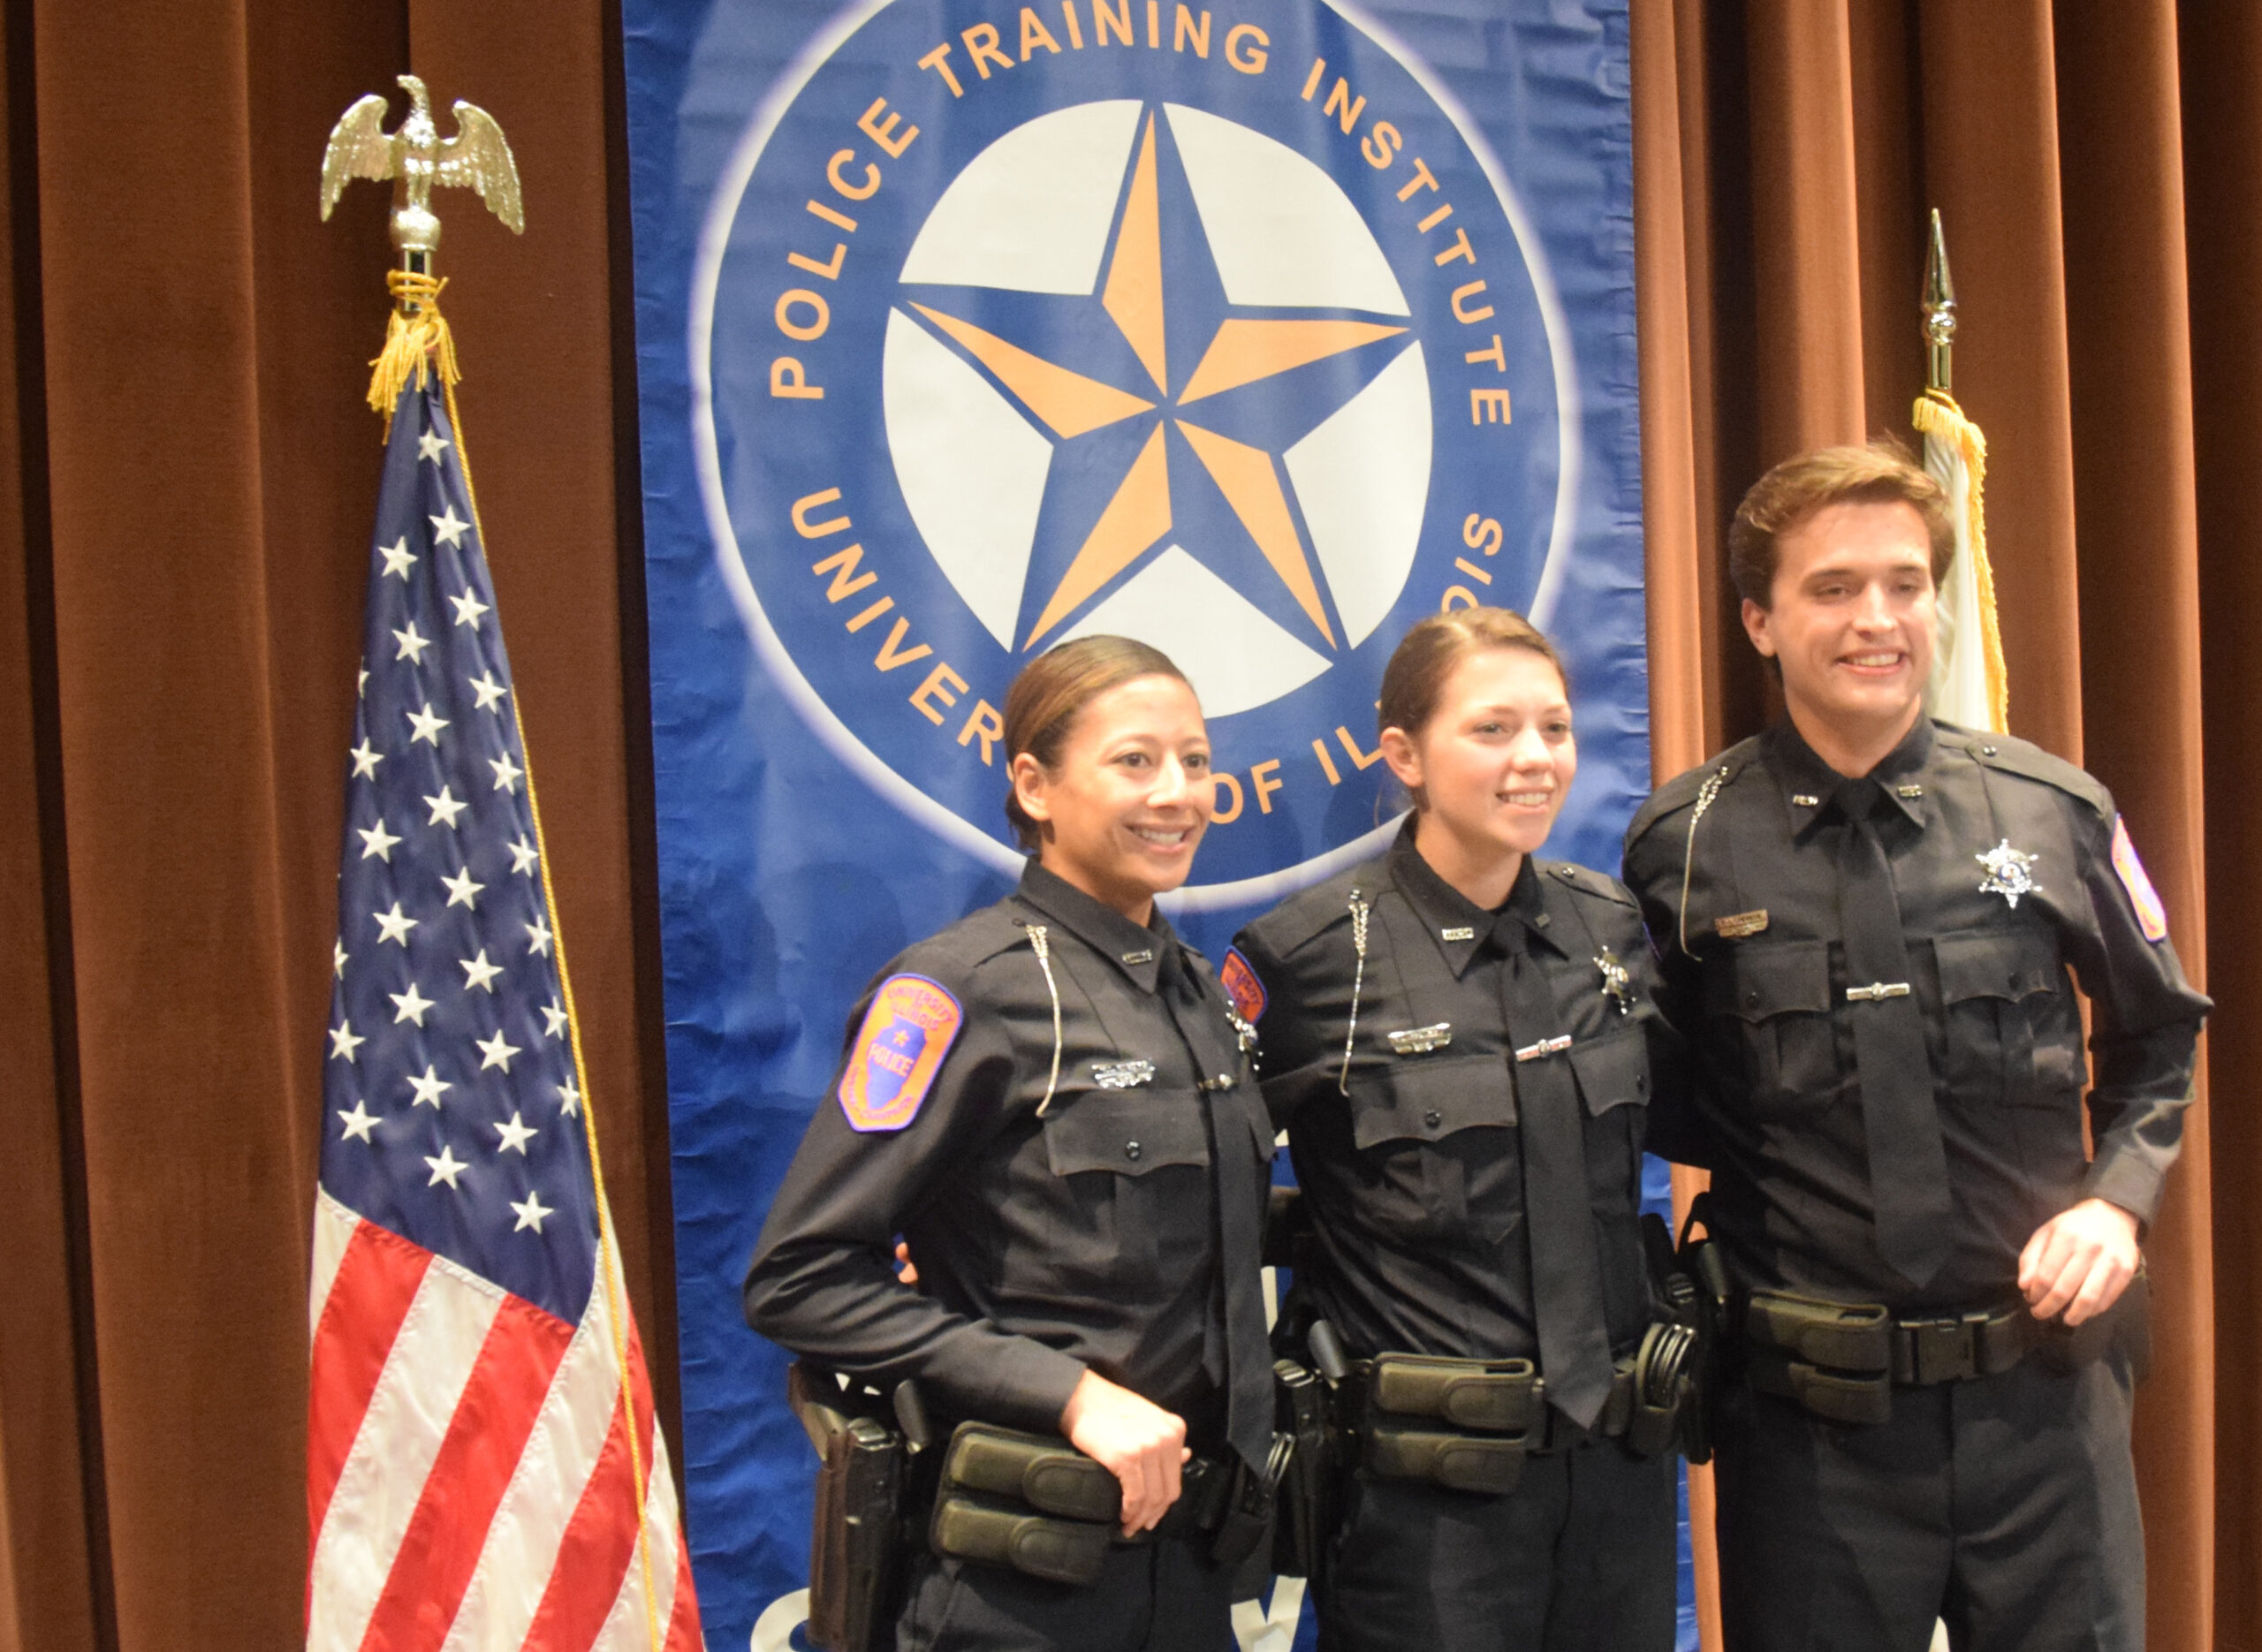 Officers Michelle Kaeding, Taylor Franzen and Edilberto Chevere were sworn in as U. of I. officers on Friday, September 18th.